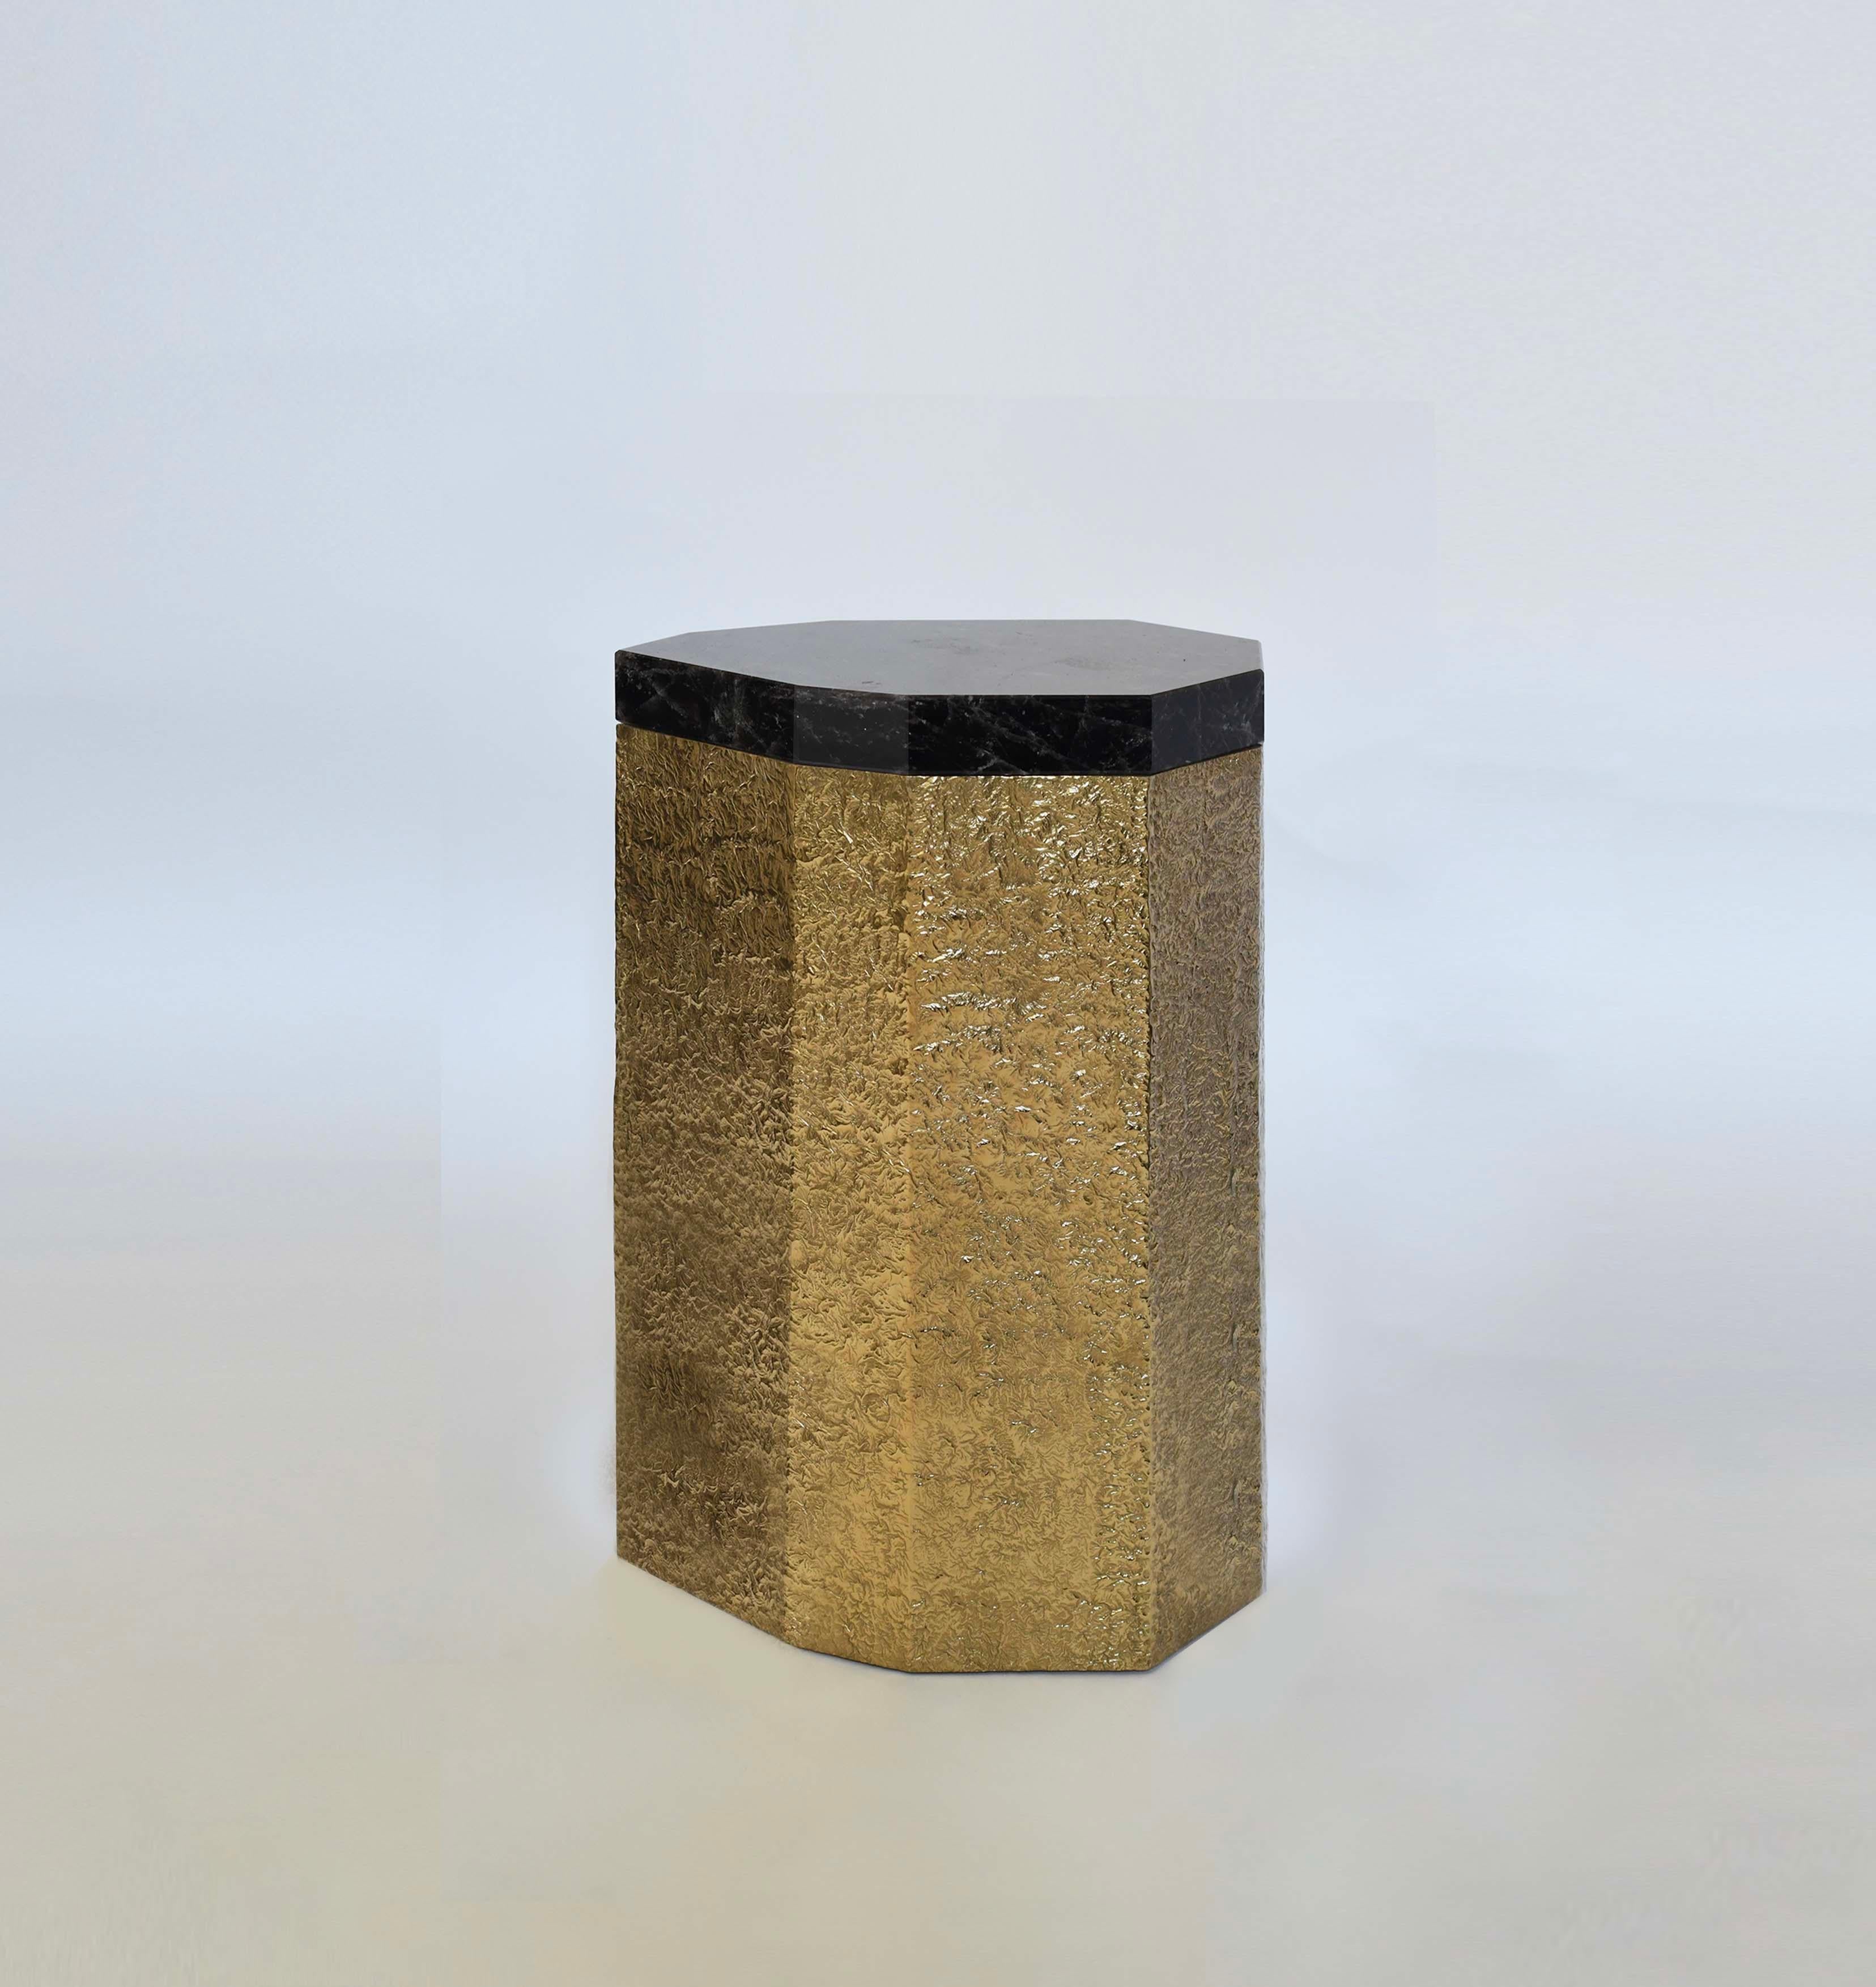 Hammered brass finish side table with dark smoky rock crystal quartz top. Created by Phoenix Gallery, NYC.
Custom size, quantity, and finish upon request.